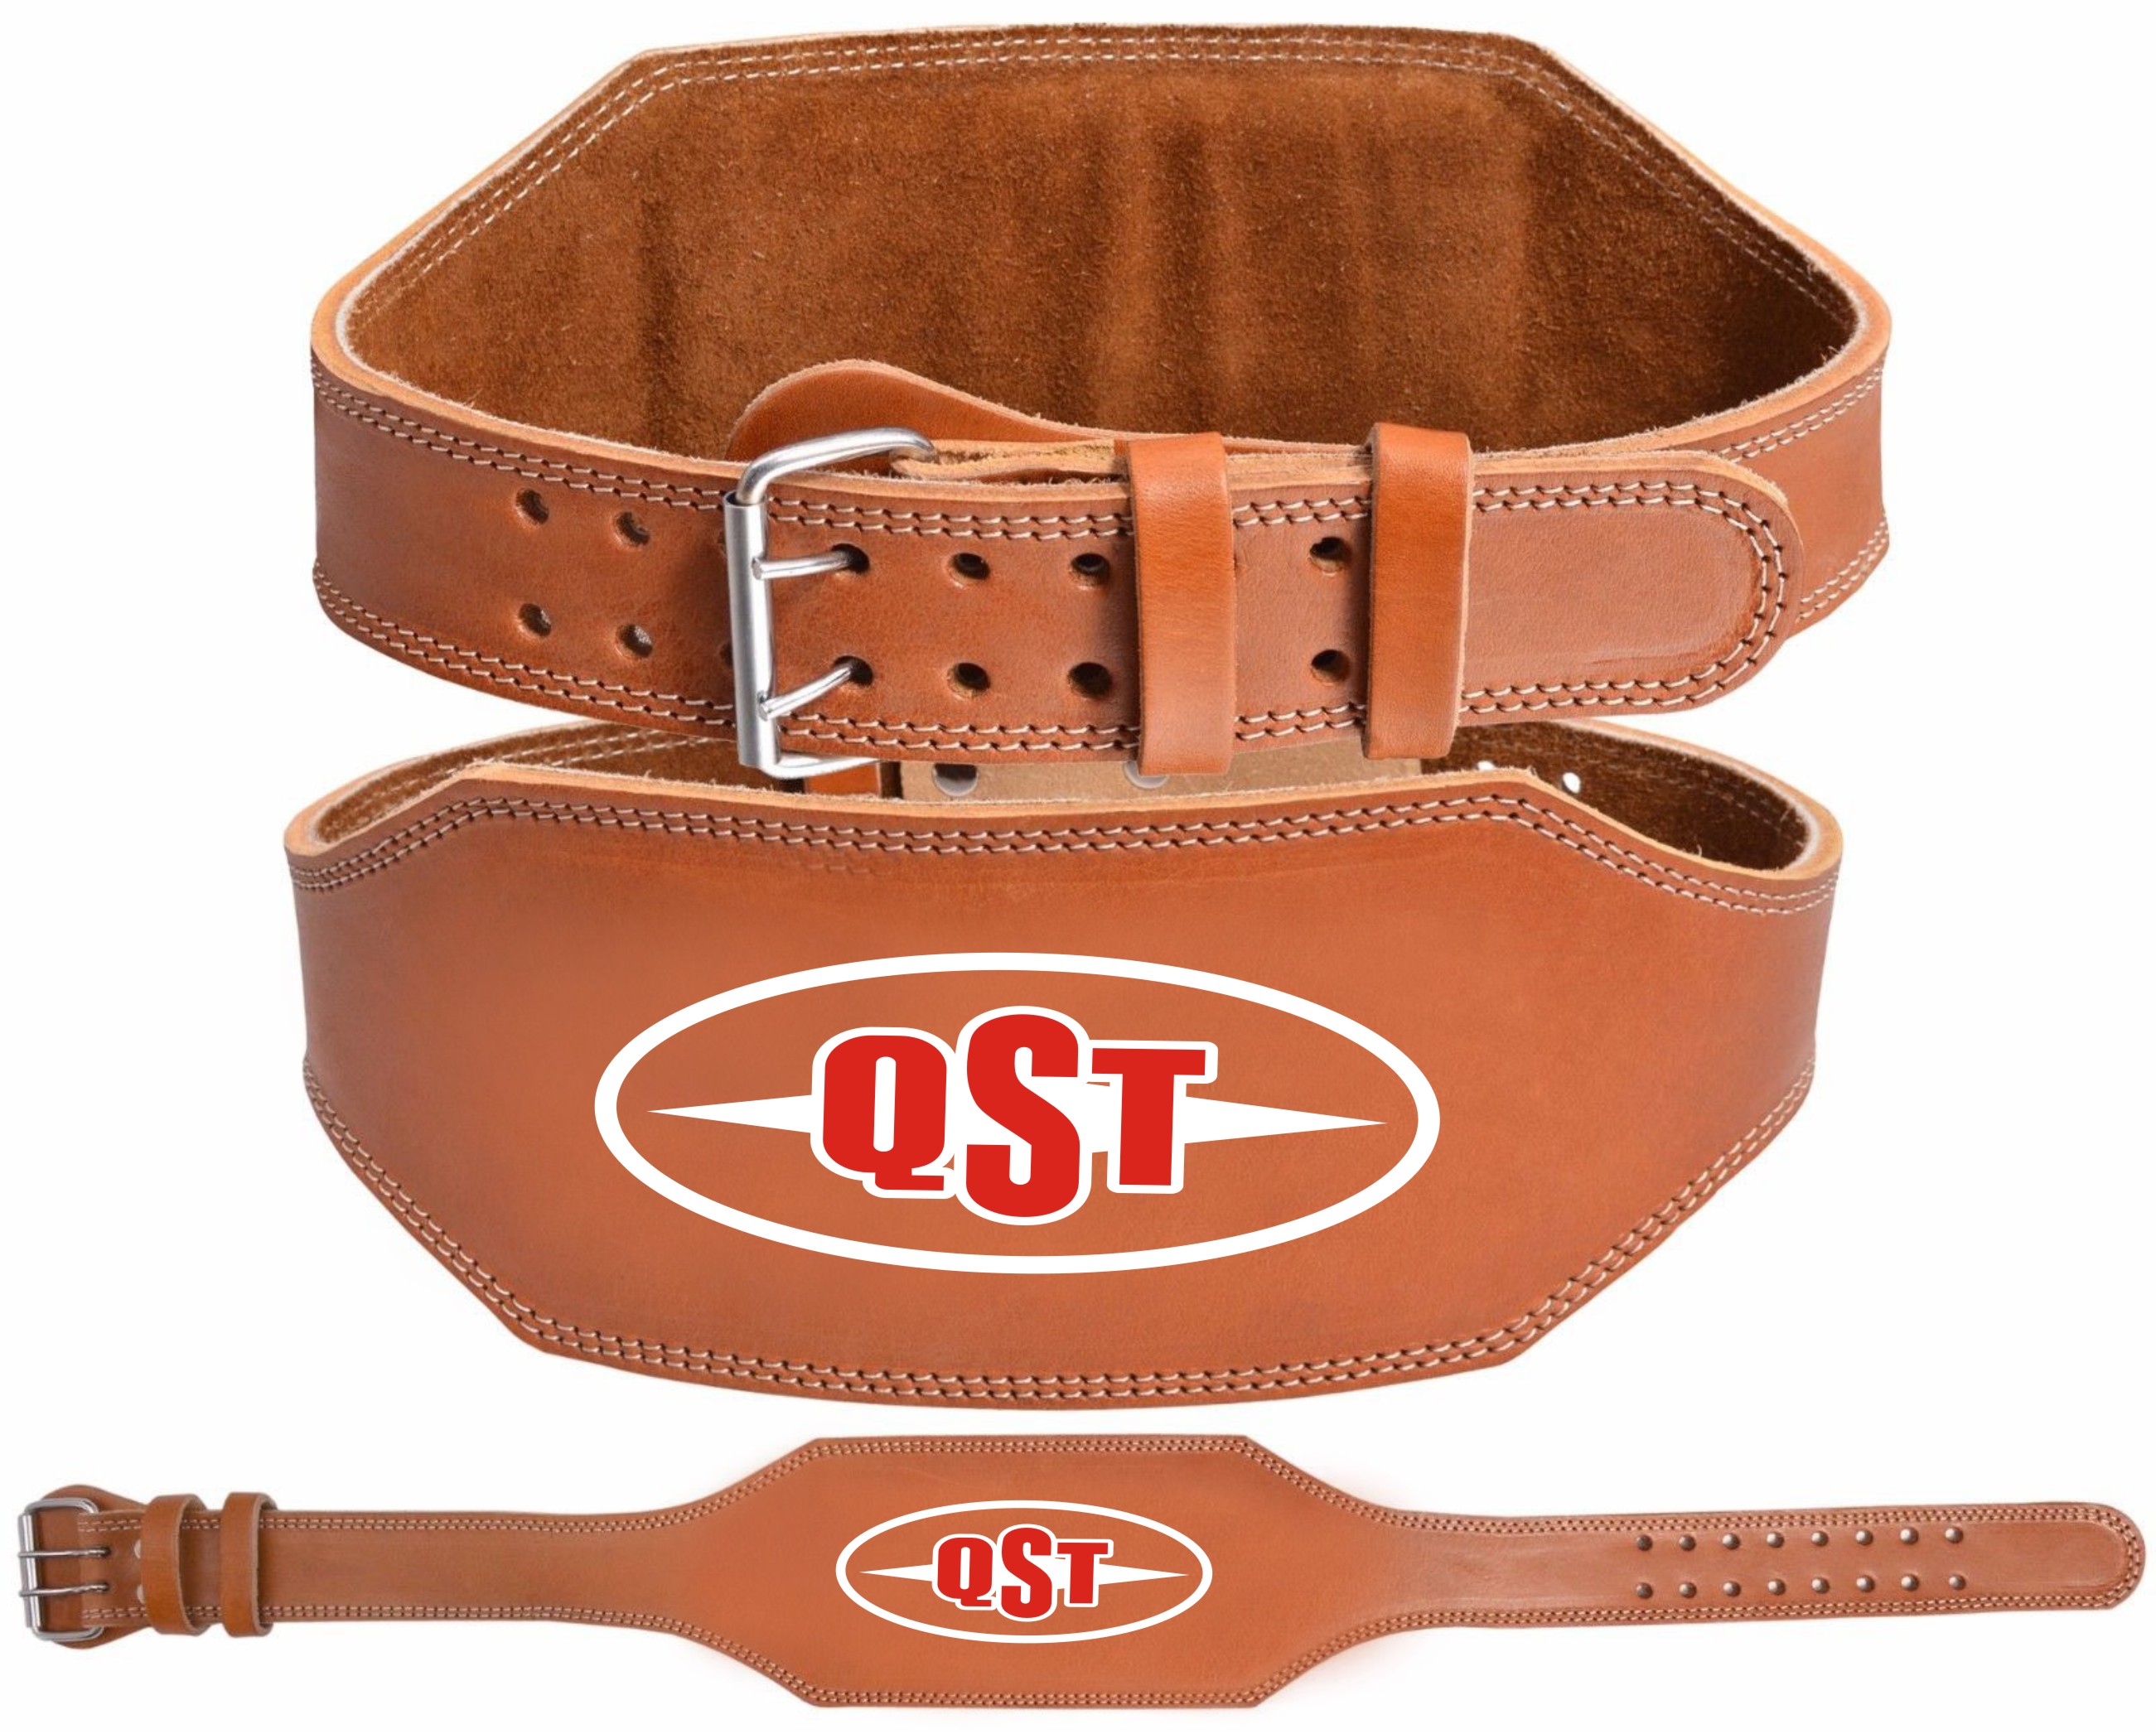 Leather Weightlifting Belt - ACS-1204